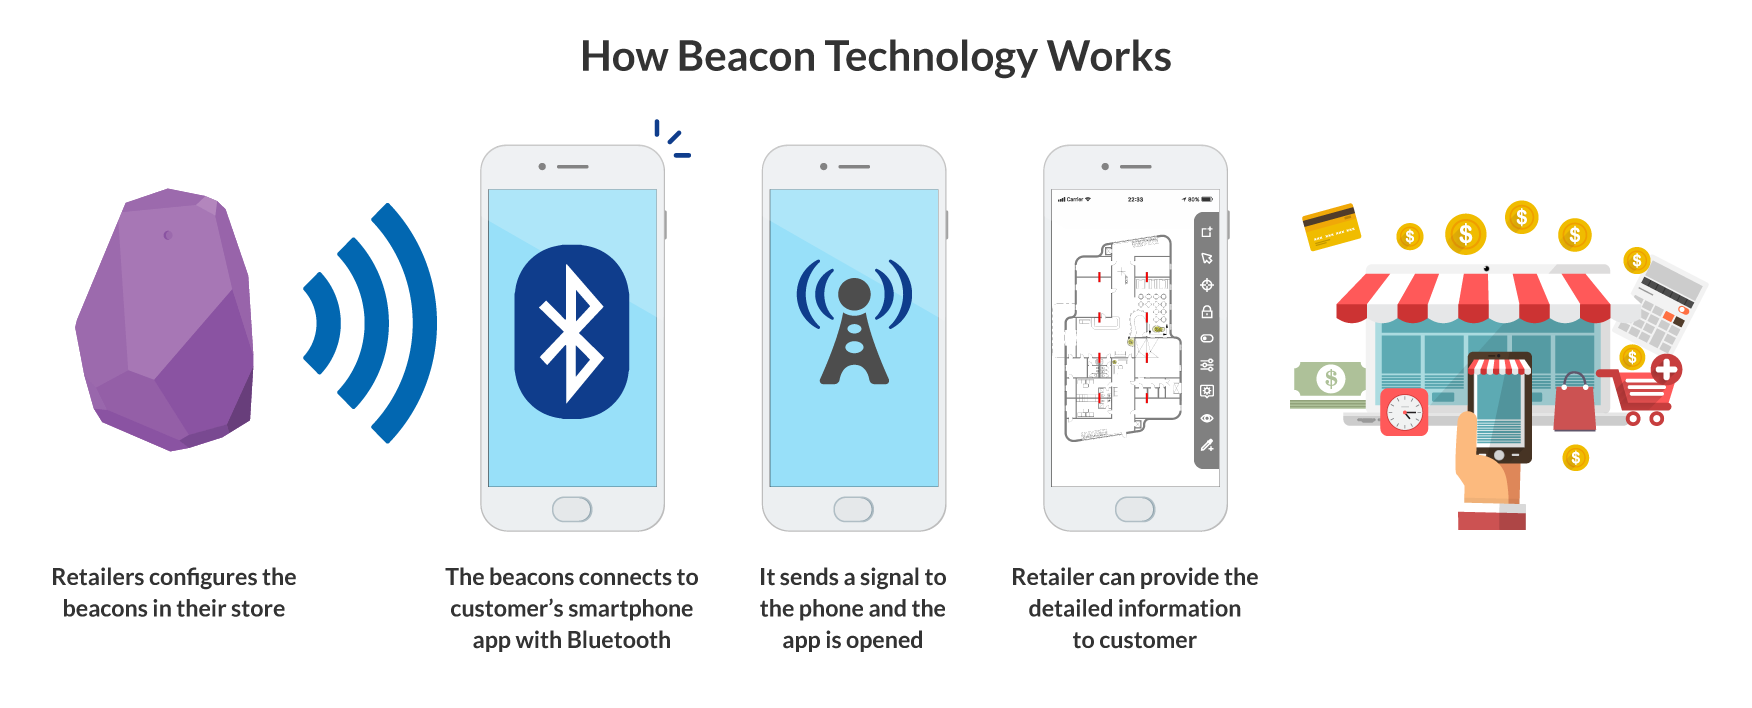 5 Things You Need to Know About Beacon Technology